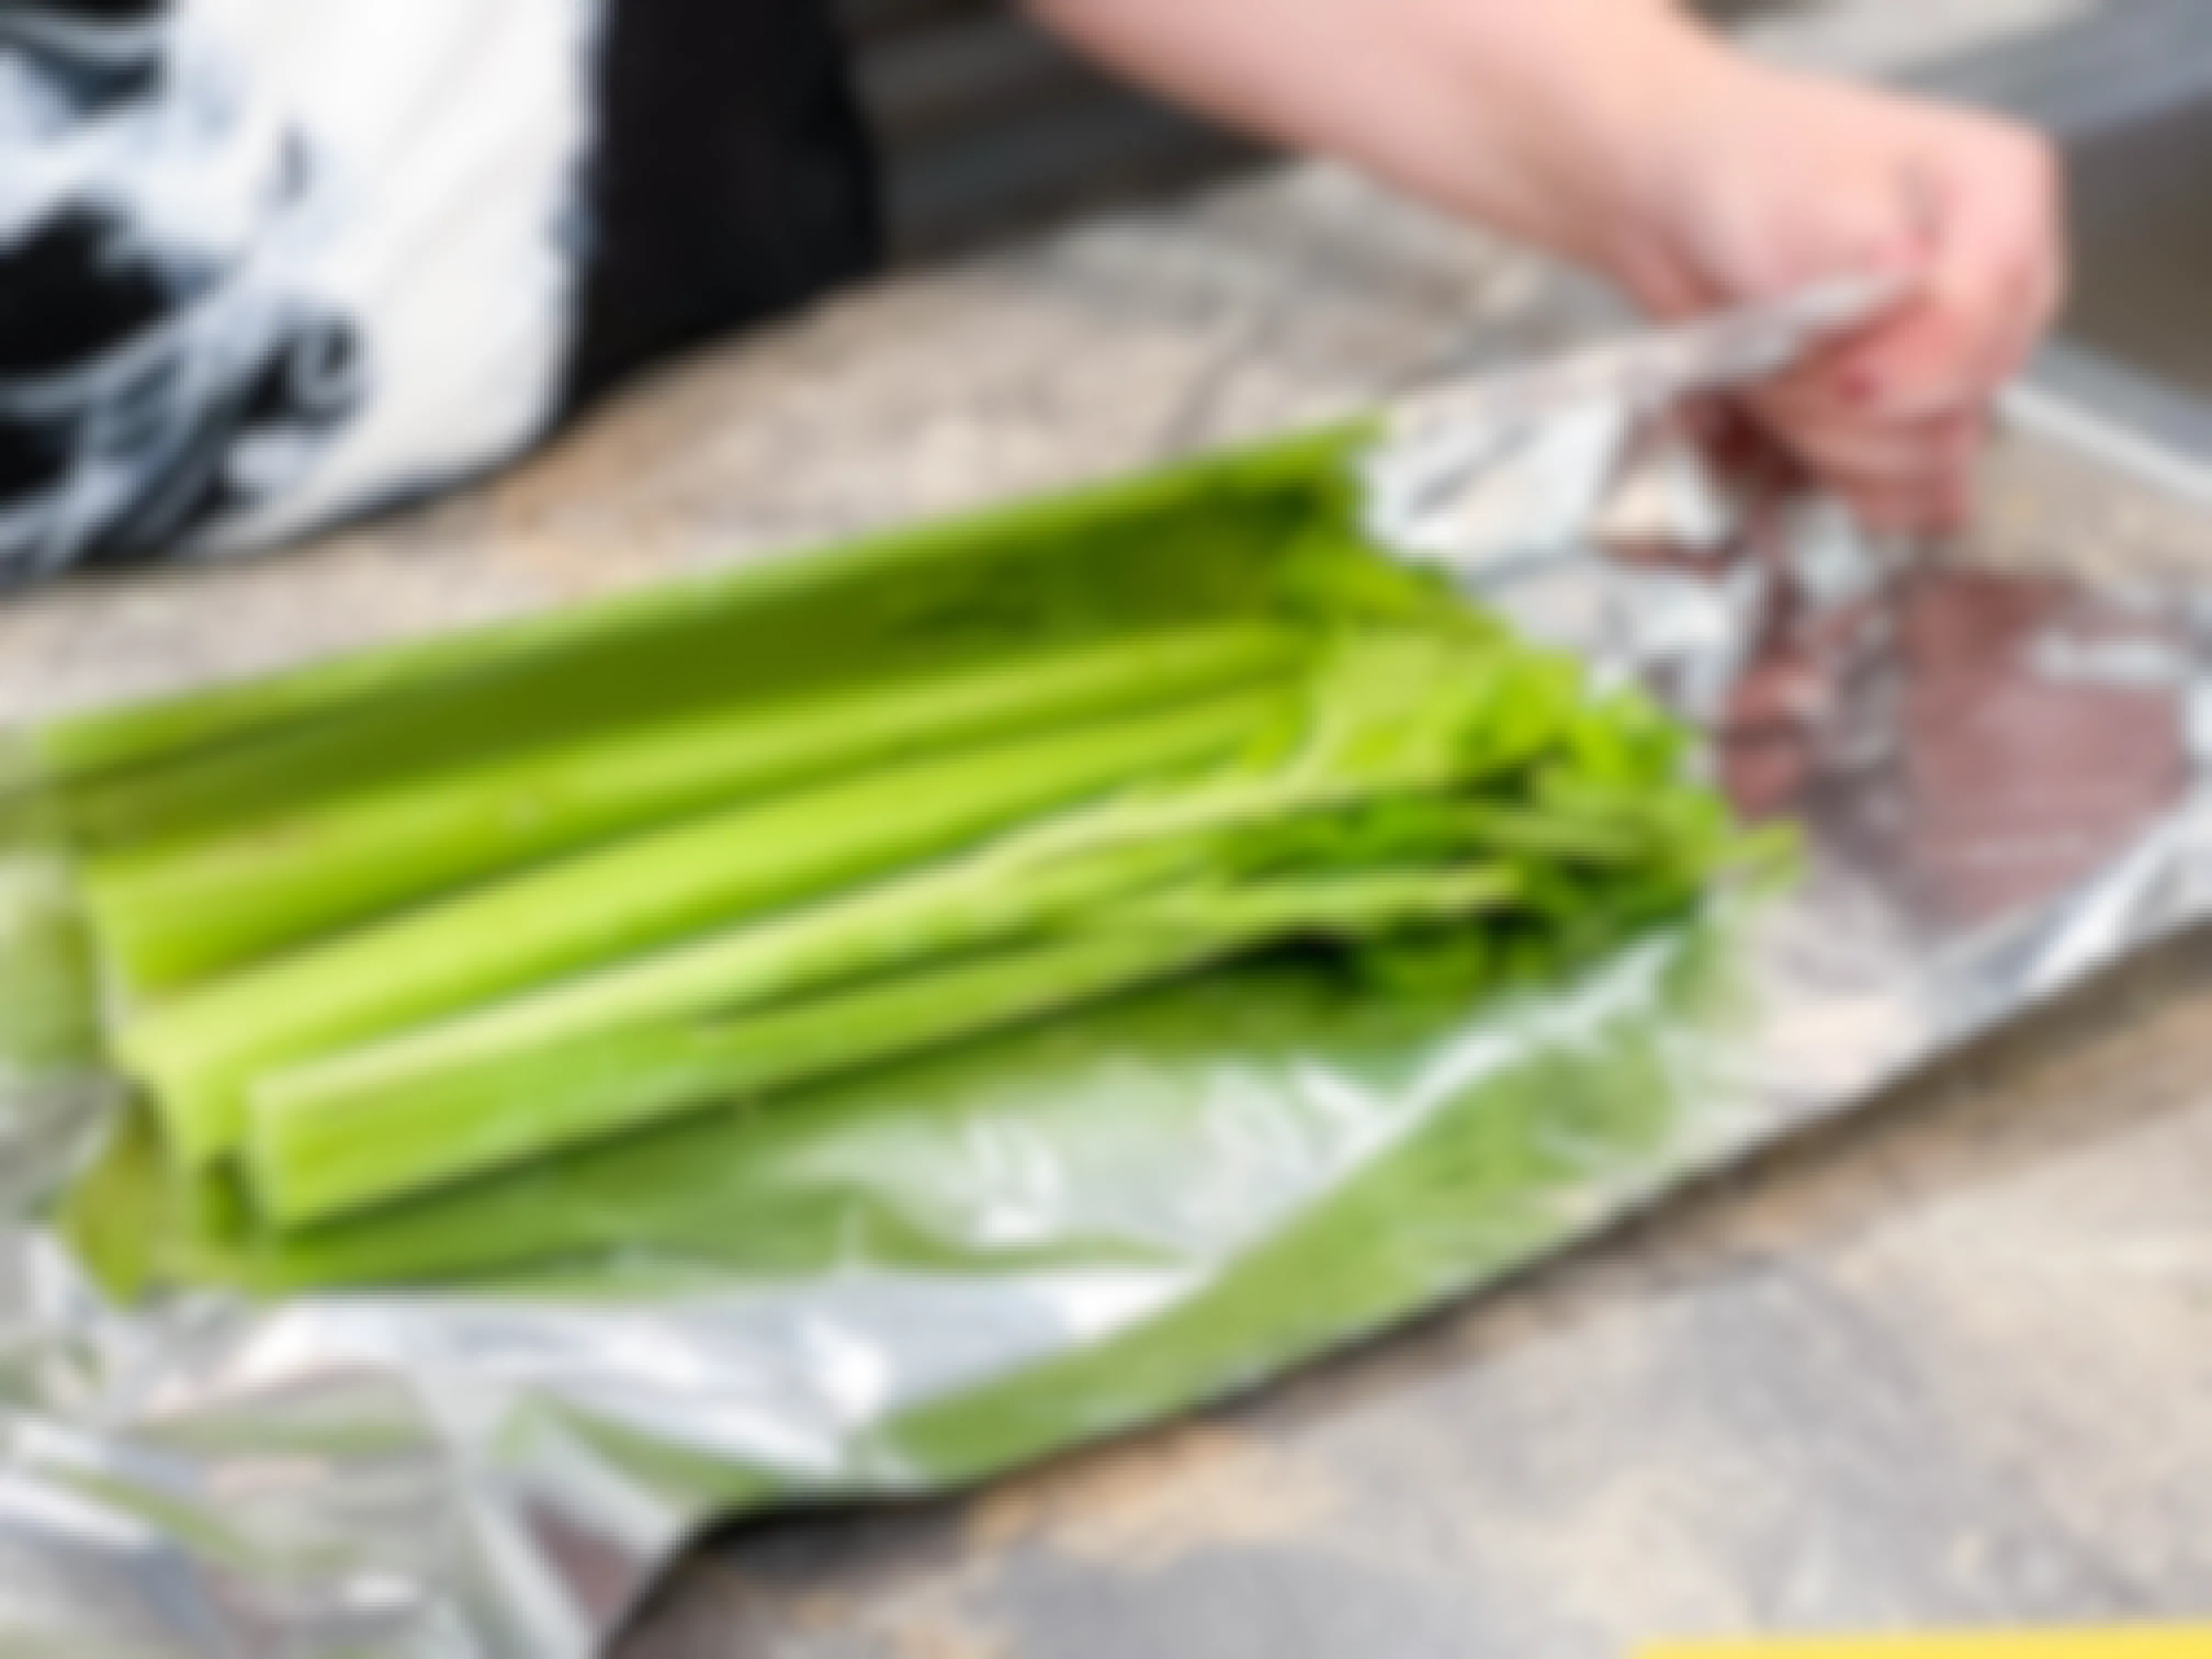 celery being wrapped in foil